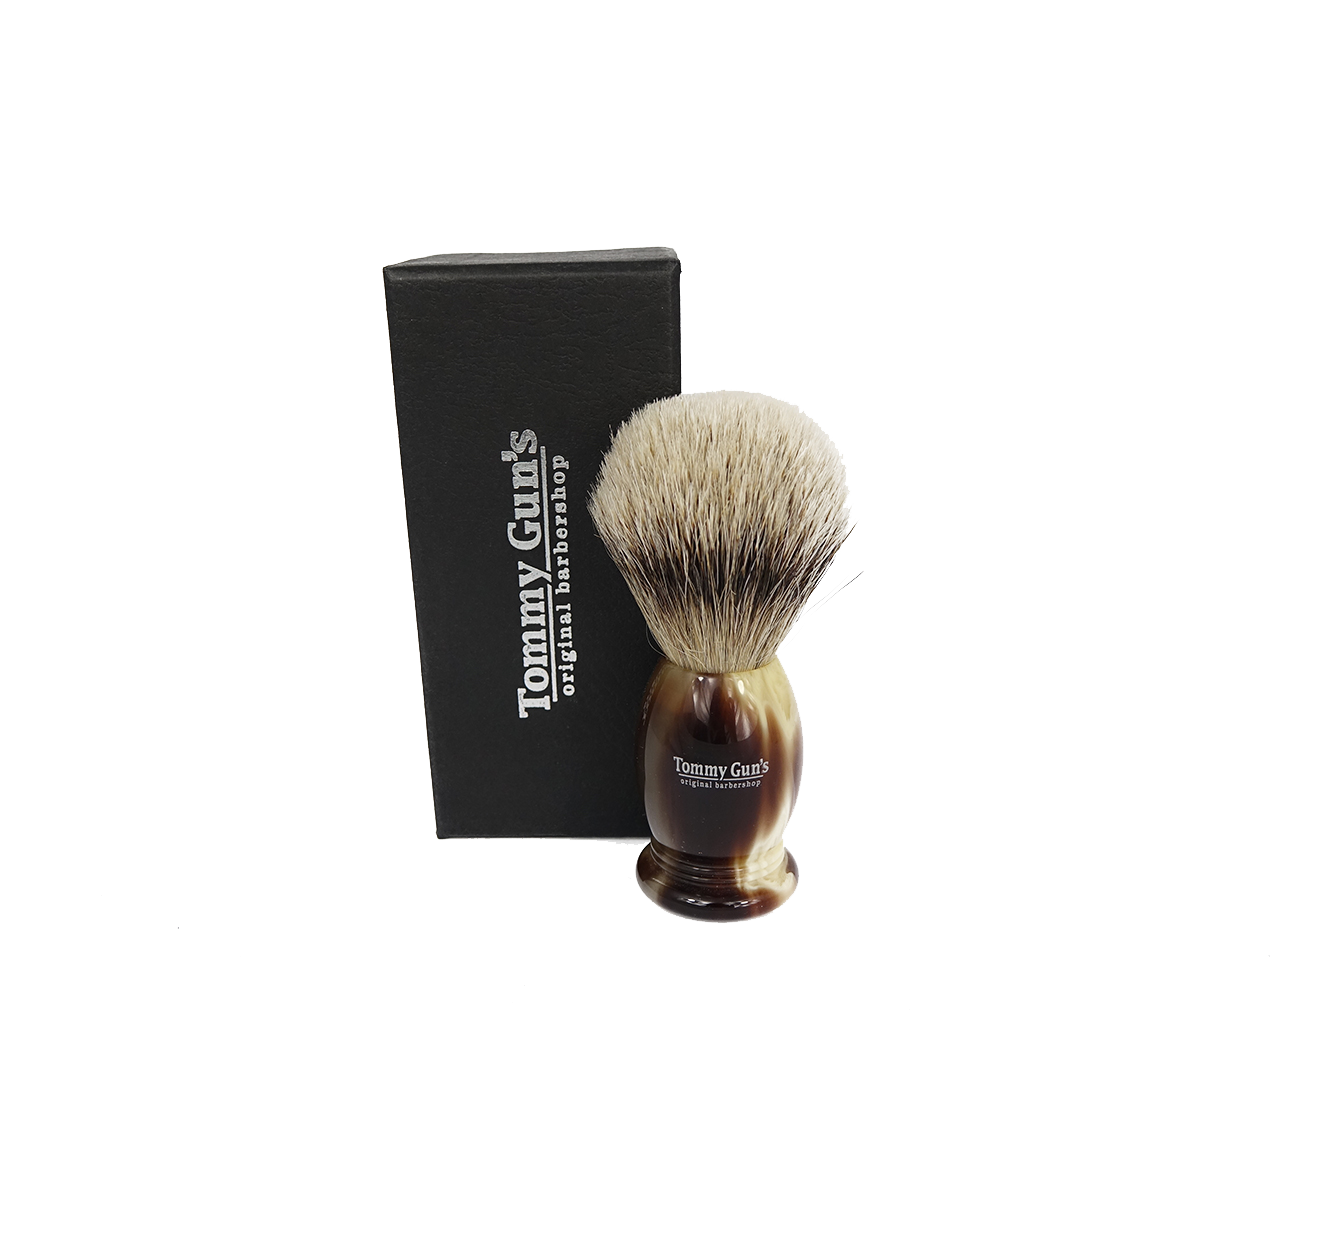 Tommy Gun's Shave Tommy Guns Shave Brush Faux Horn Handle 20mm Silver Tip Badger S121-FH04